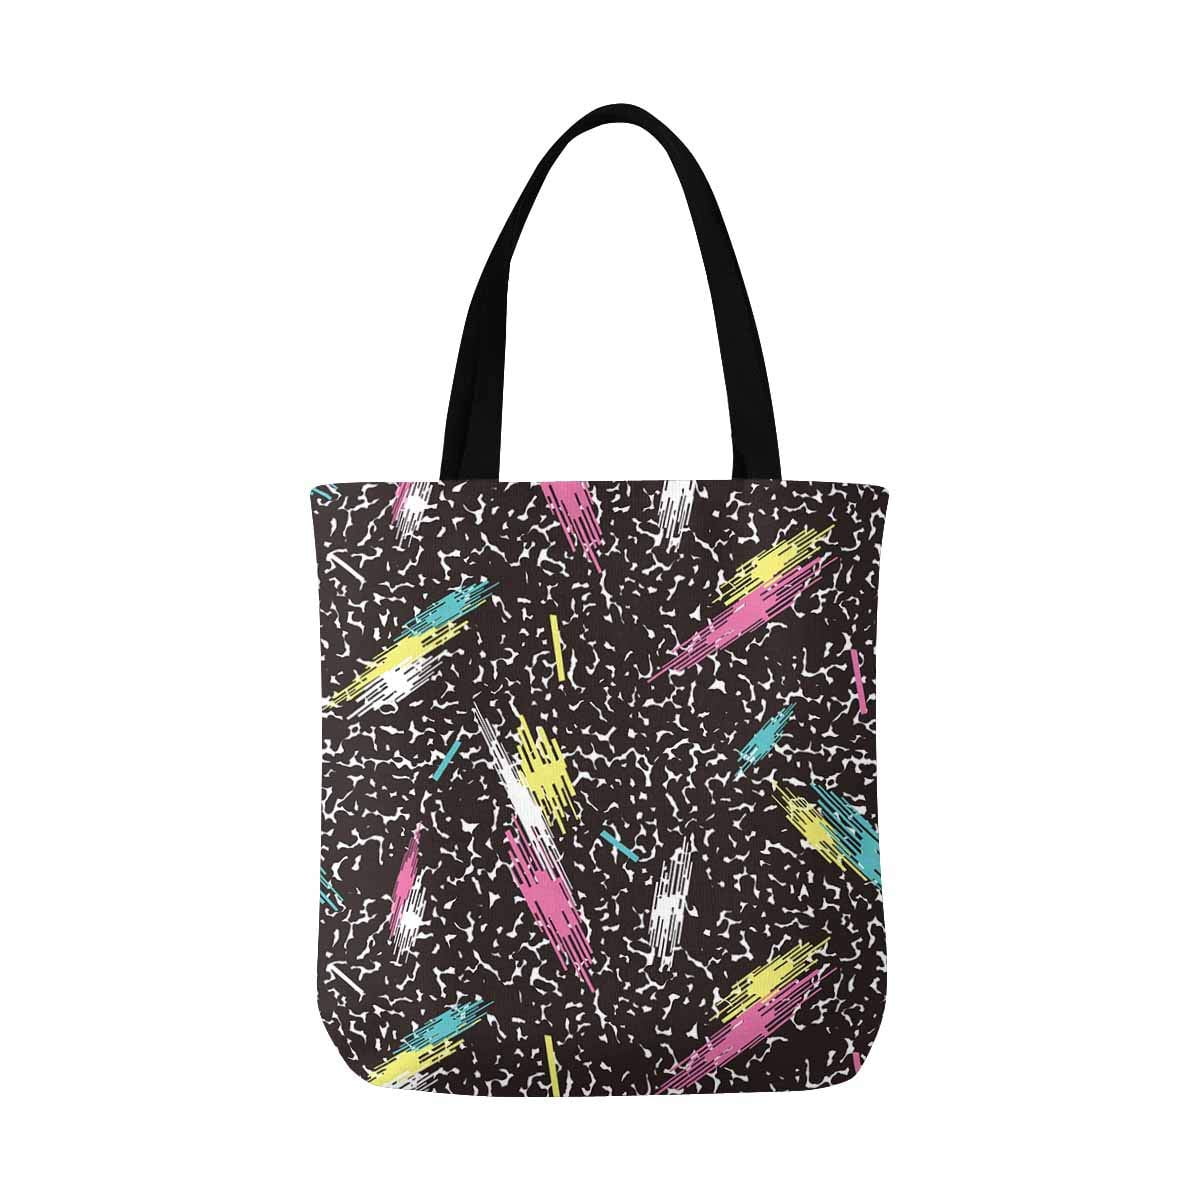 ASHLEIGH Seamless Memphis Dots Pattern in Abstract 90s Style Canvas Tote Bag Resuable Grocery ...